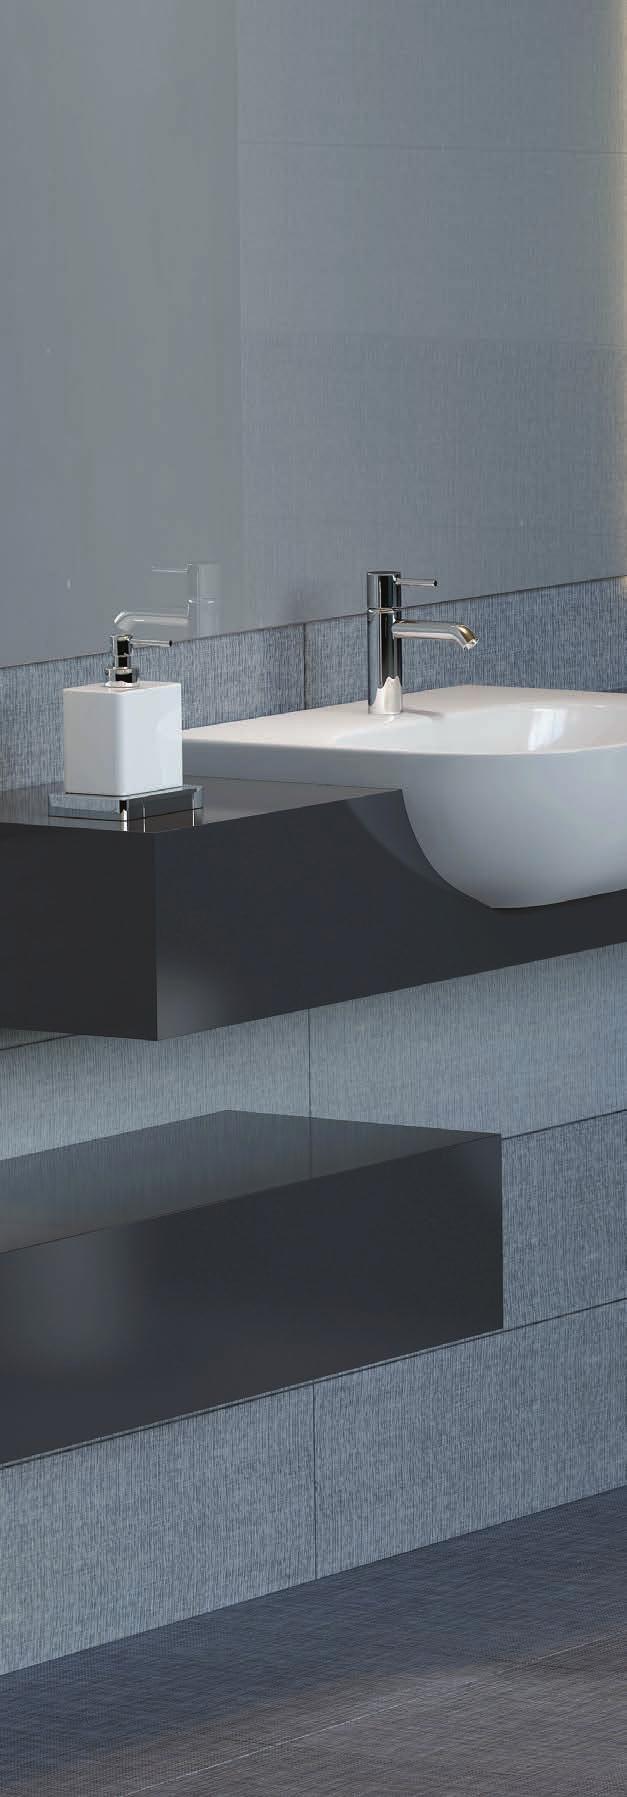 Our collection of ceramic toilets and basins from industry renowned brands such as Cerastyle, Cersanit and Kale, along with our very own exclusive Technique and Technique Plus brand, present an